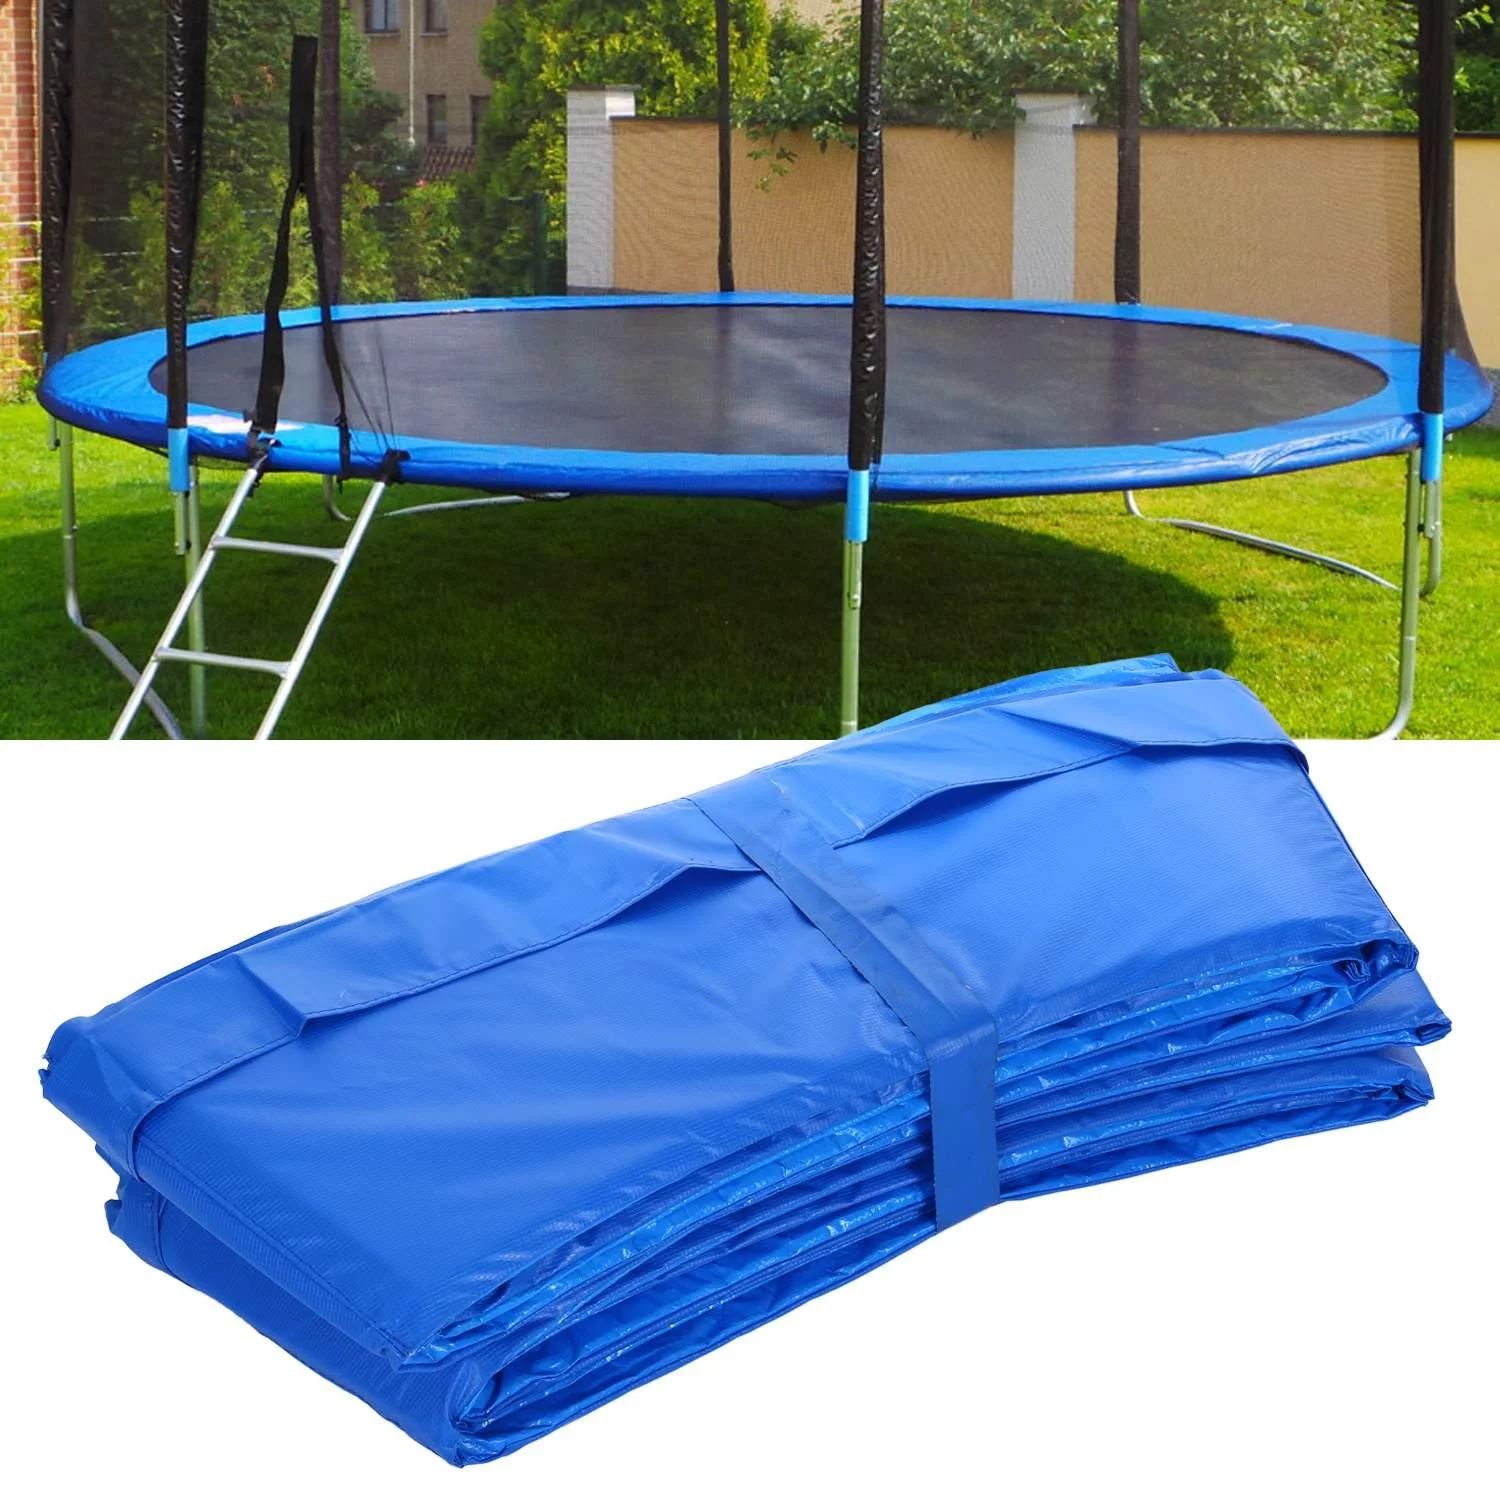 How To Measure For A Trampoline Pad